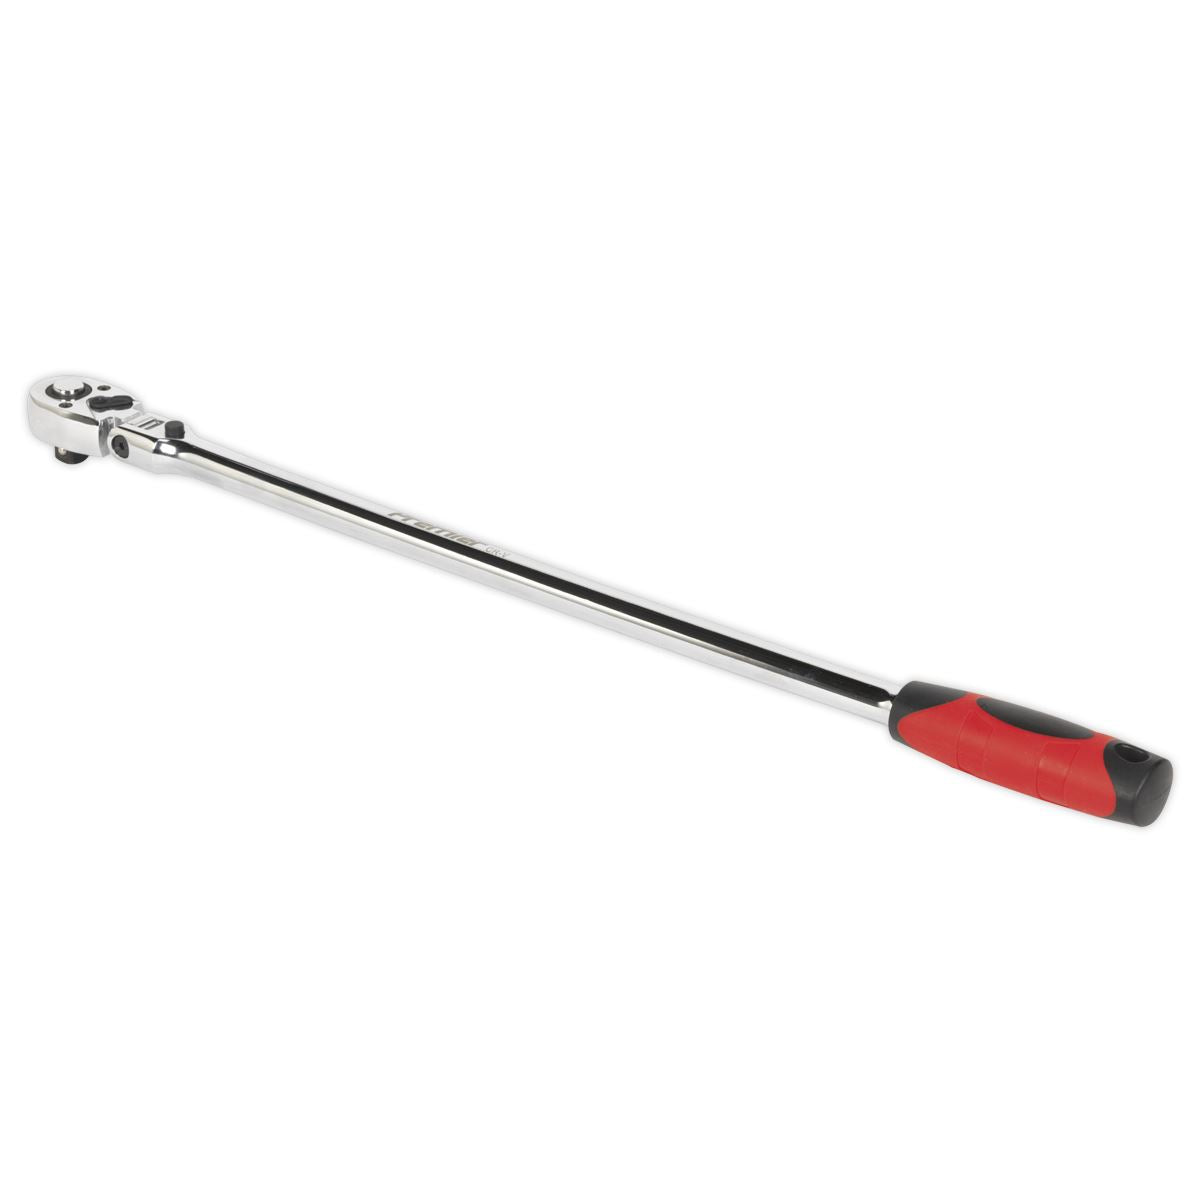 Sealey Ratchet Wrench Handle Flexi-Head 1/2" Drive Extra Long Premier 600mm